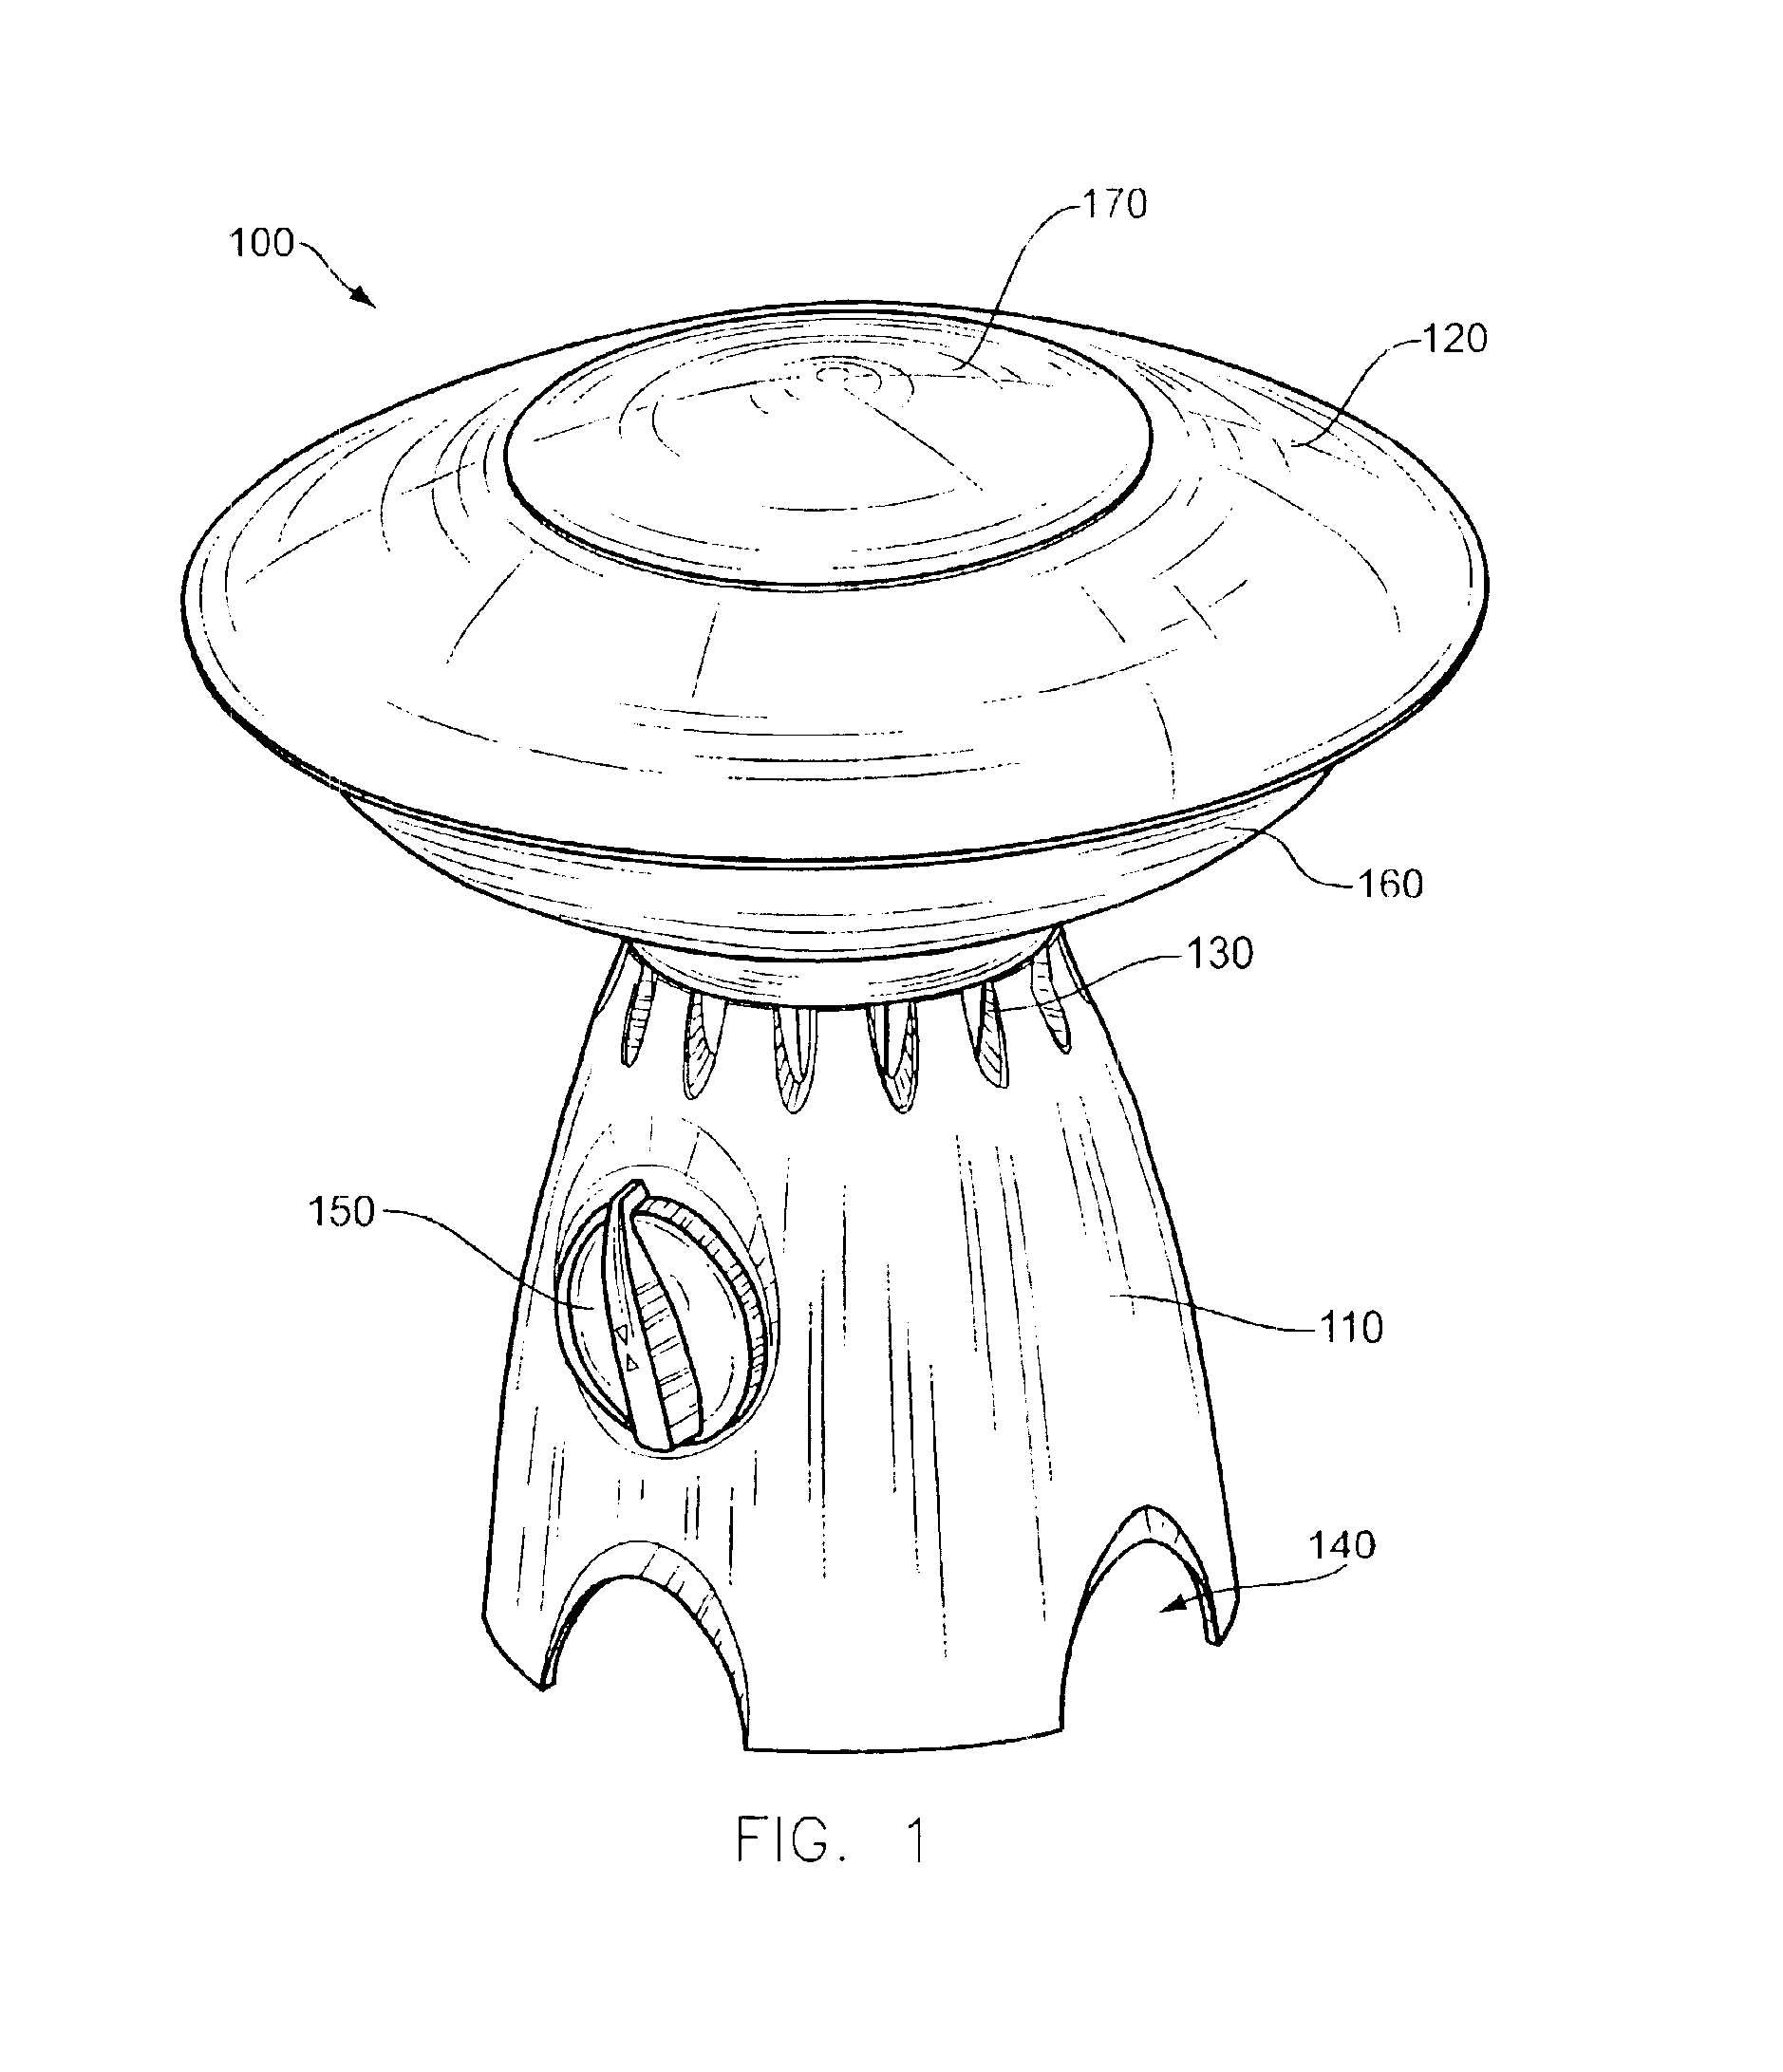 Light fixture and chemical distribution device